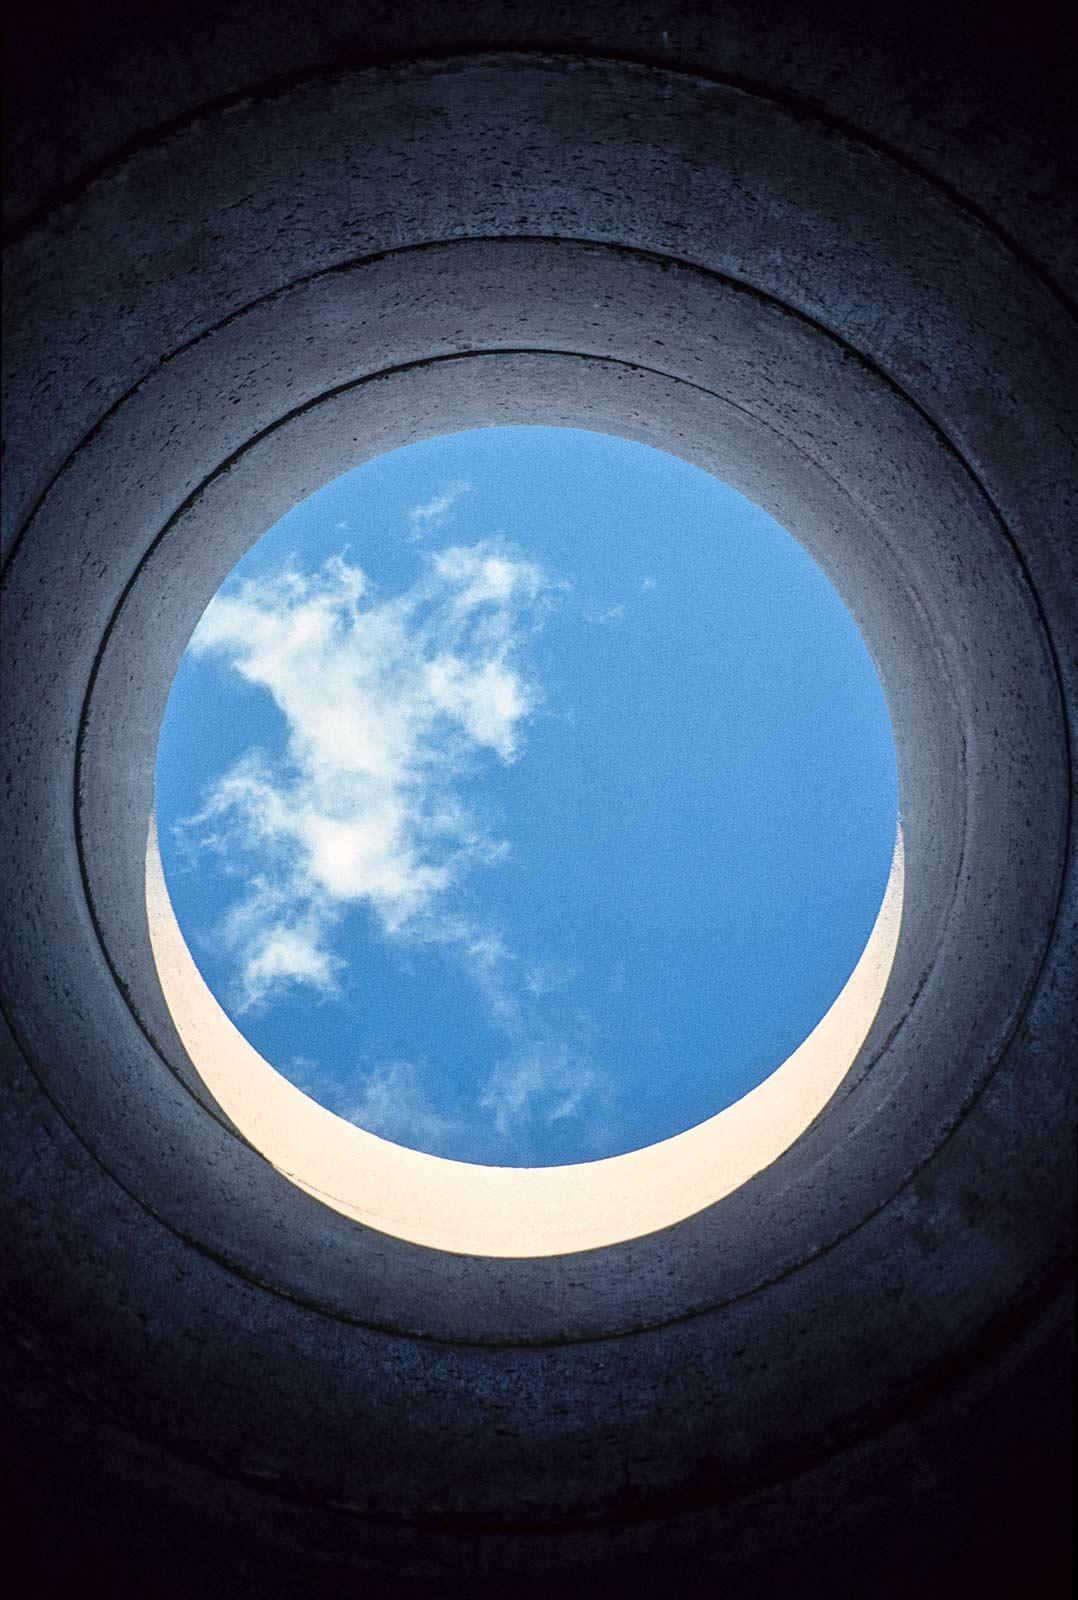 The sky framed by a circular concrete tunnel